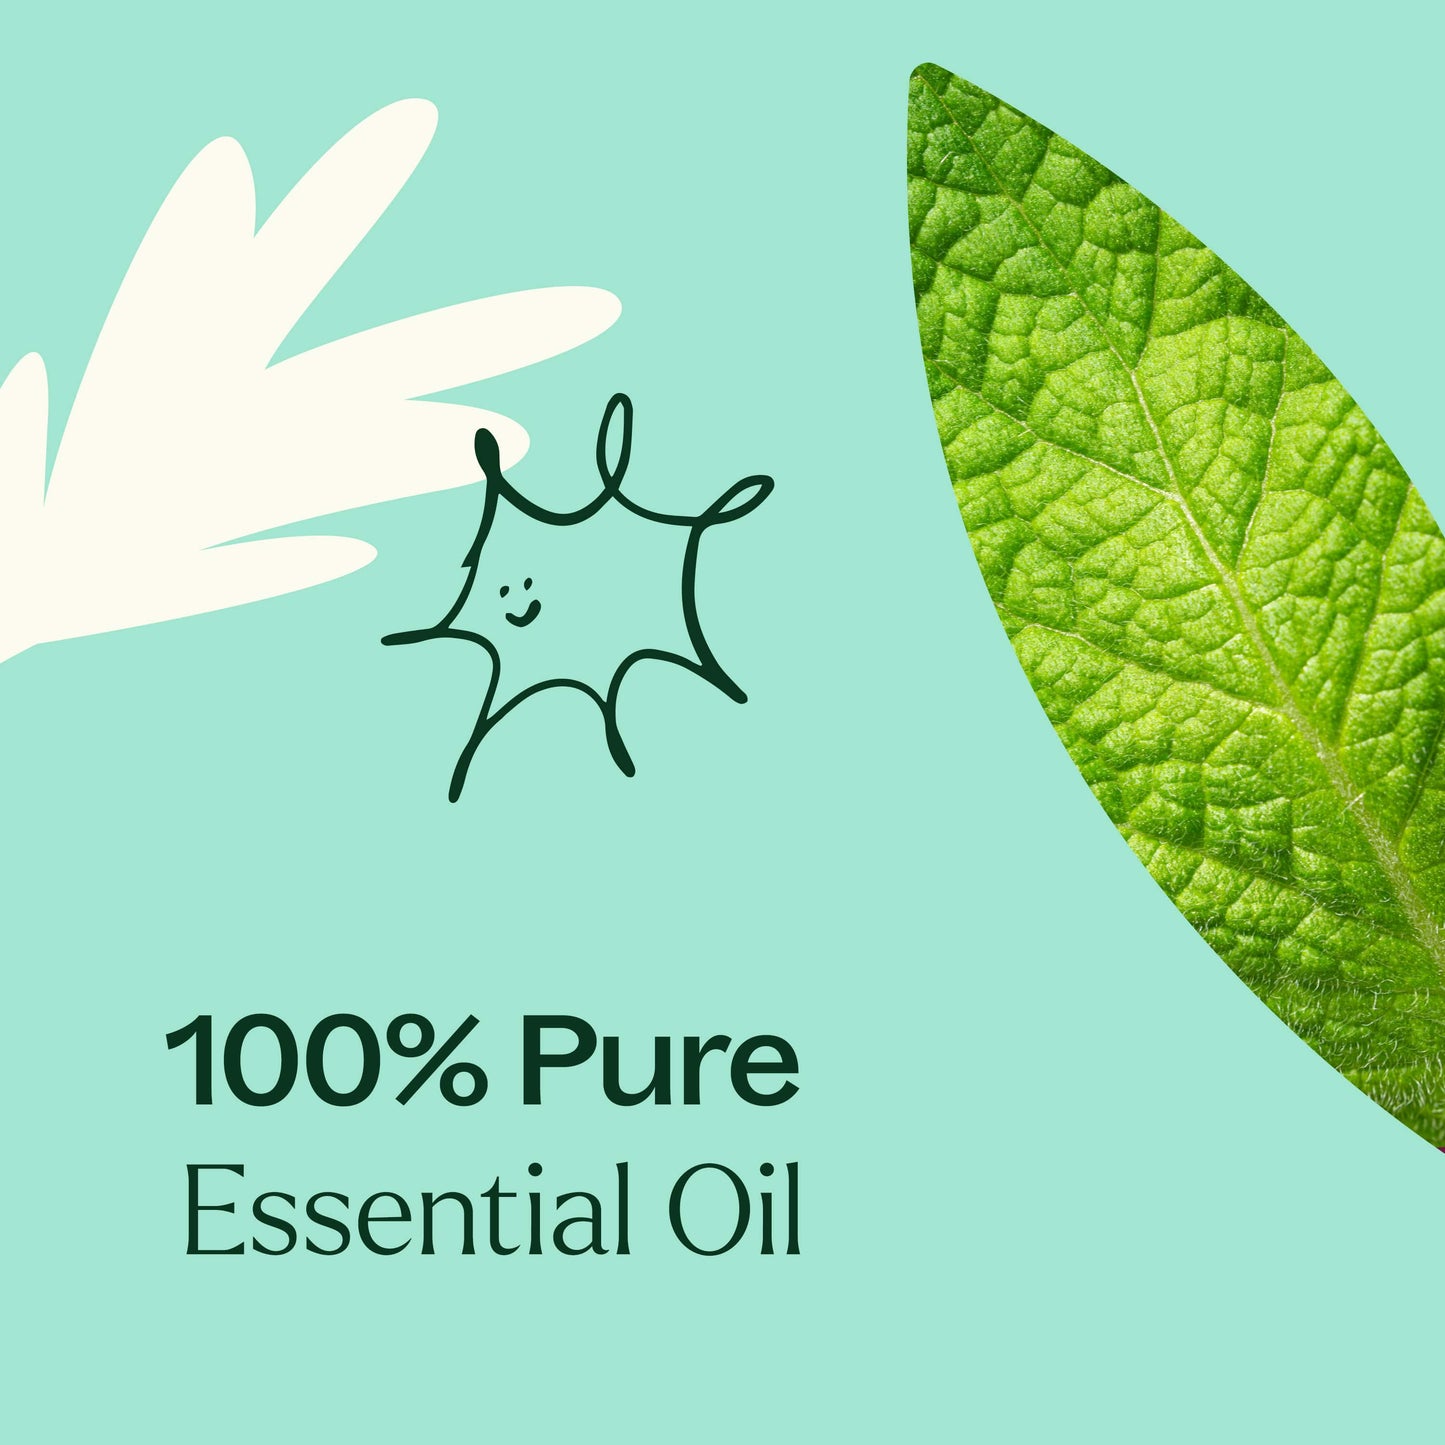 Tension Relief Essential Oil Blend is 100% pure